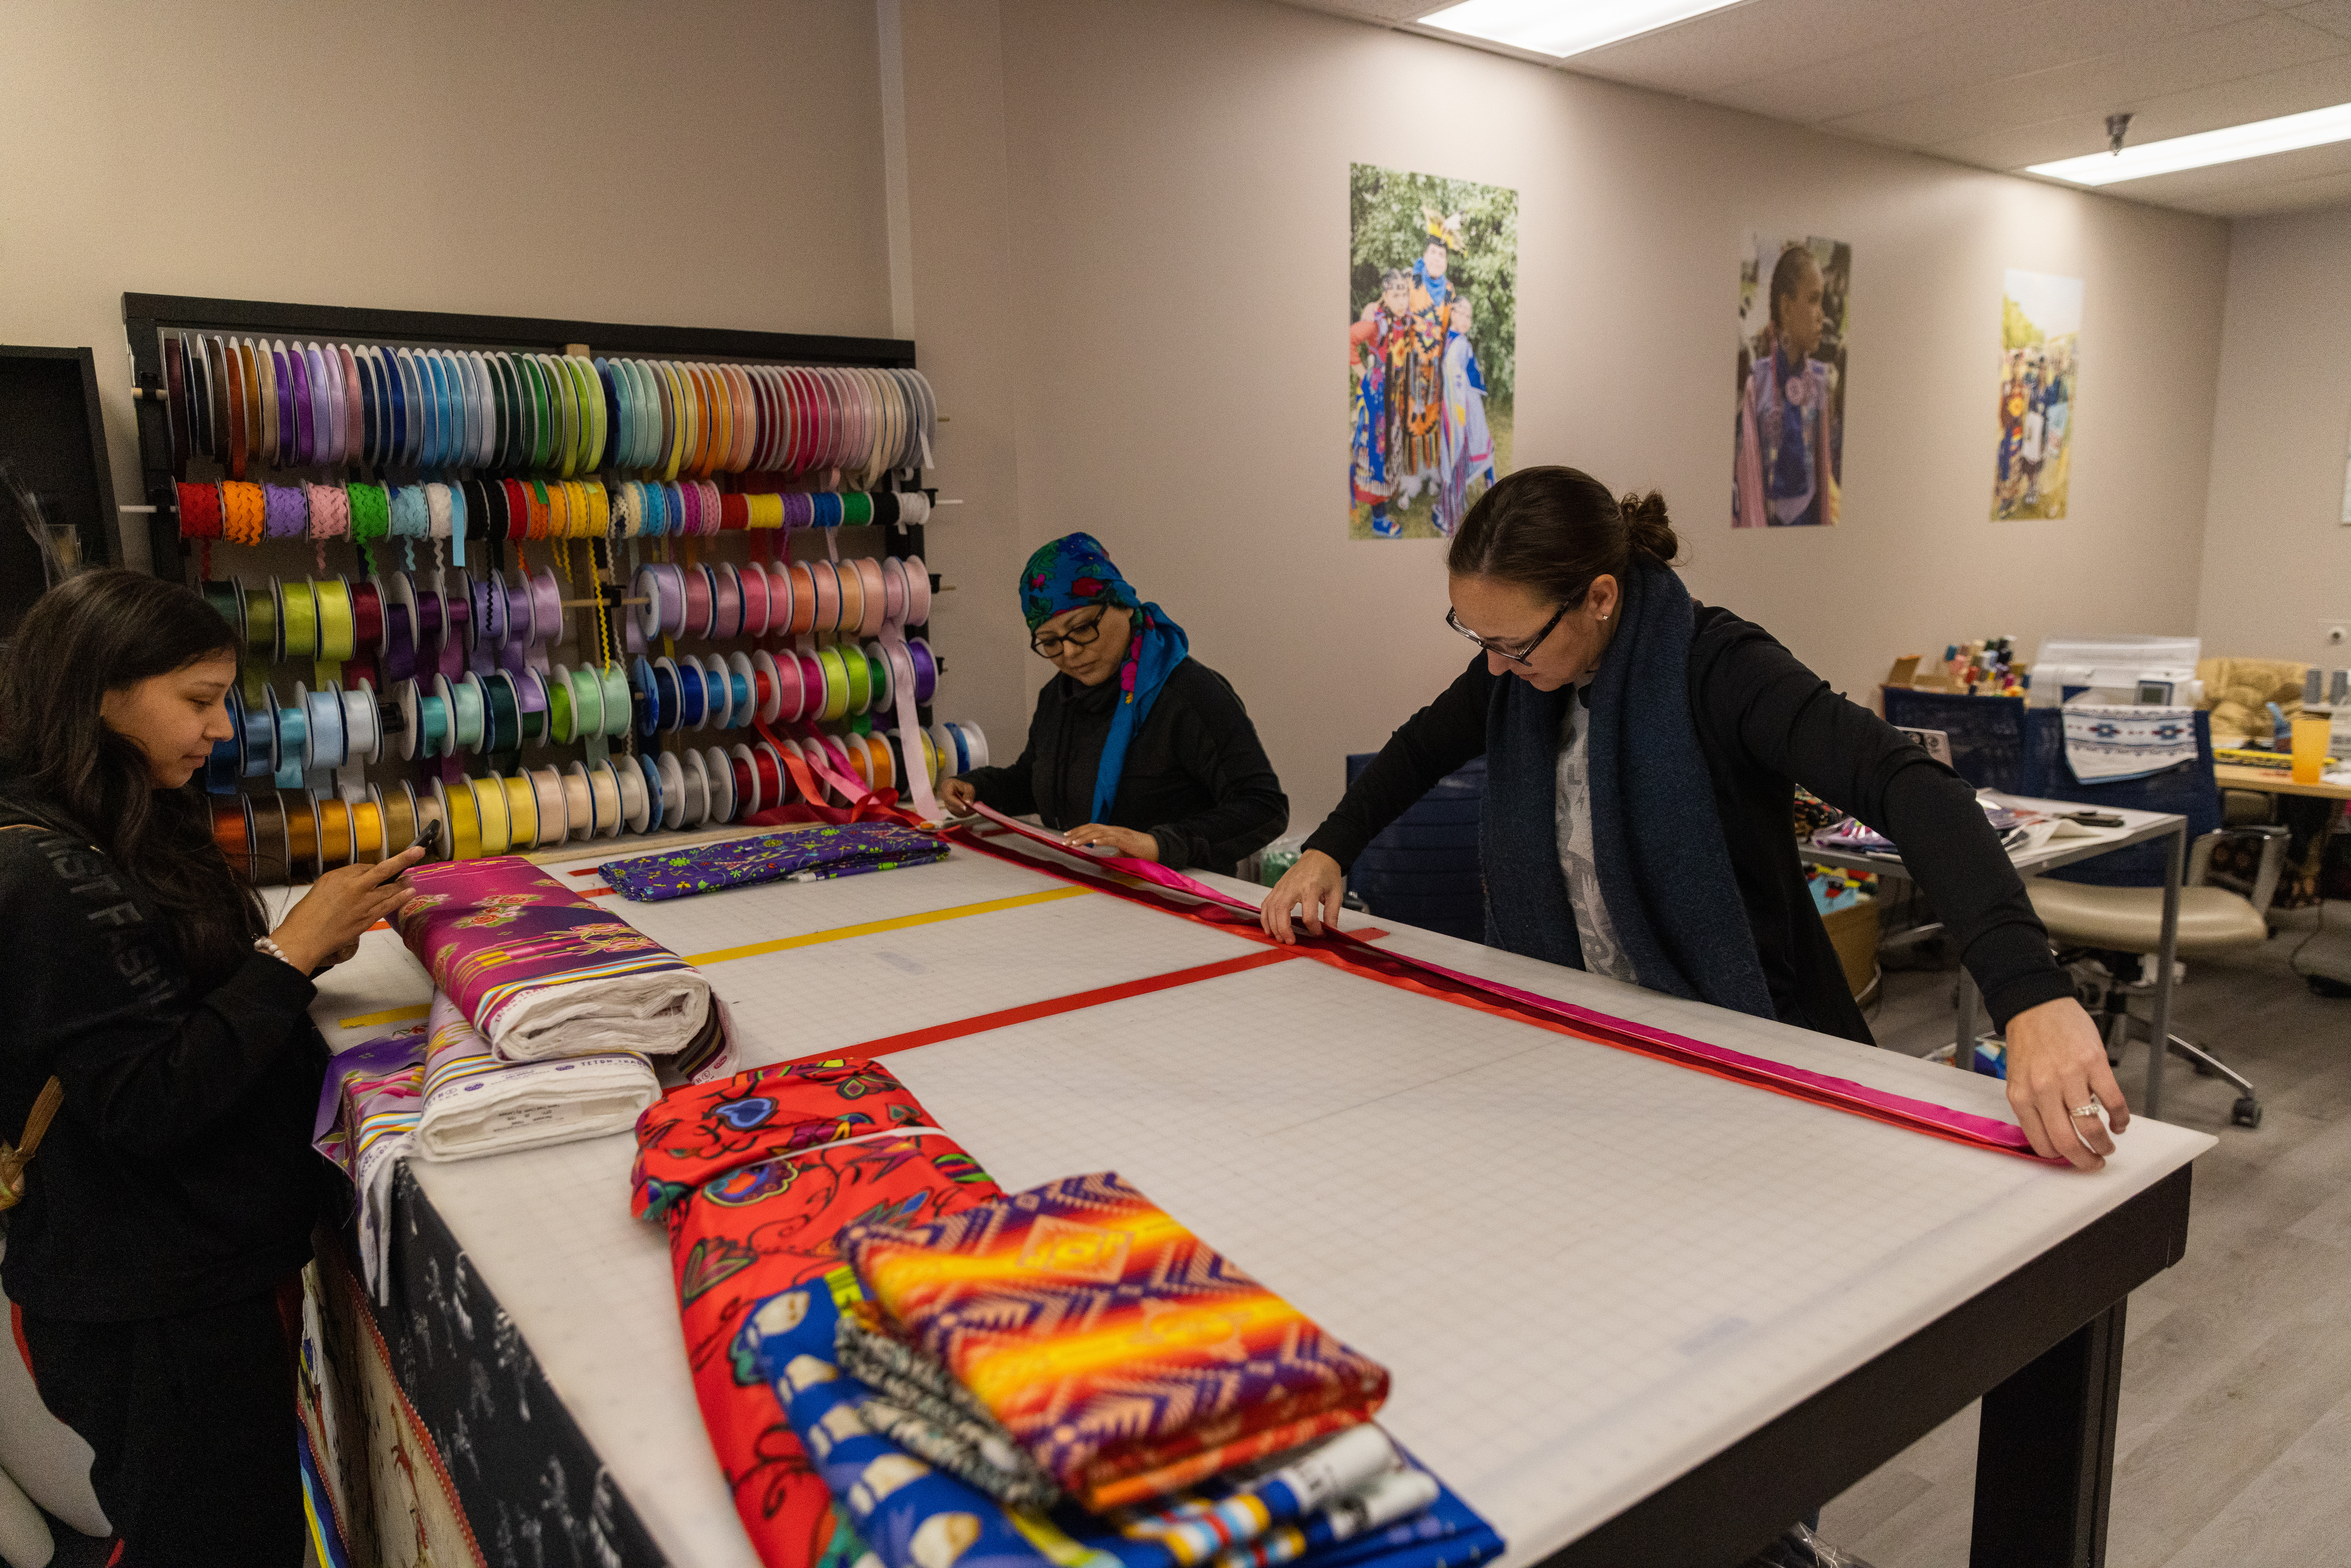 Three people stand around a cutting table flanked by colorful bolts of fabrics and rolls of ribbons. Two of them are on one side of the table gathering ribbons together as they fulfill an order for the customer on the other side of the table. The customer is waiting, while looking at their mobile phone.